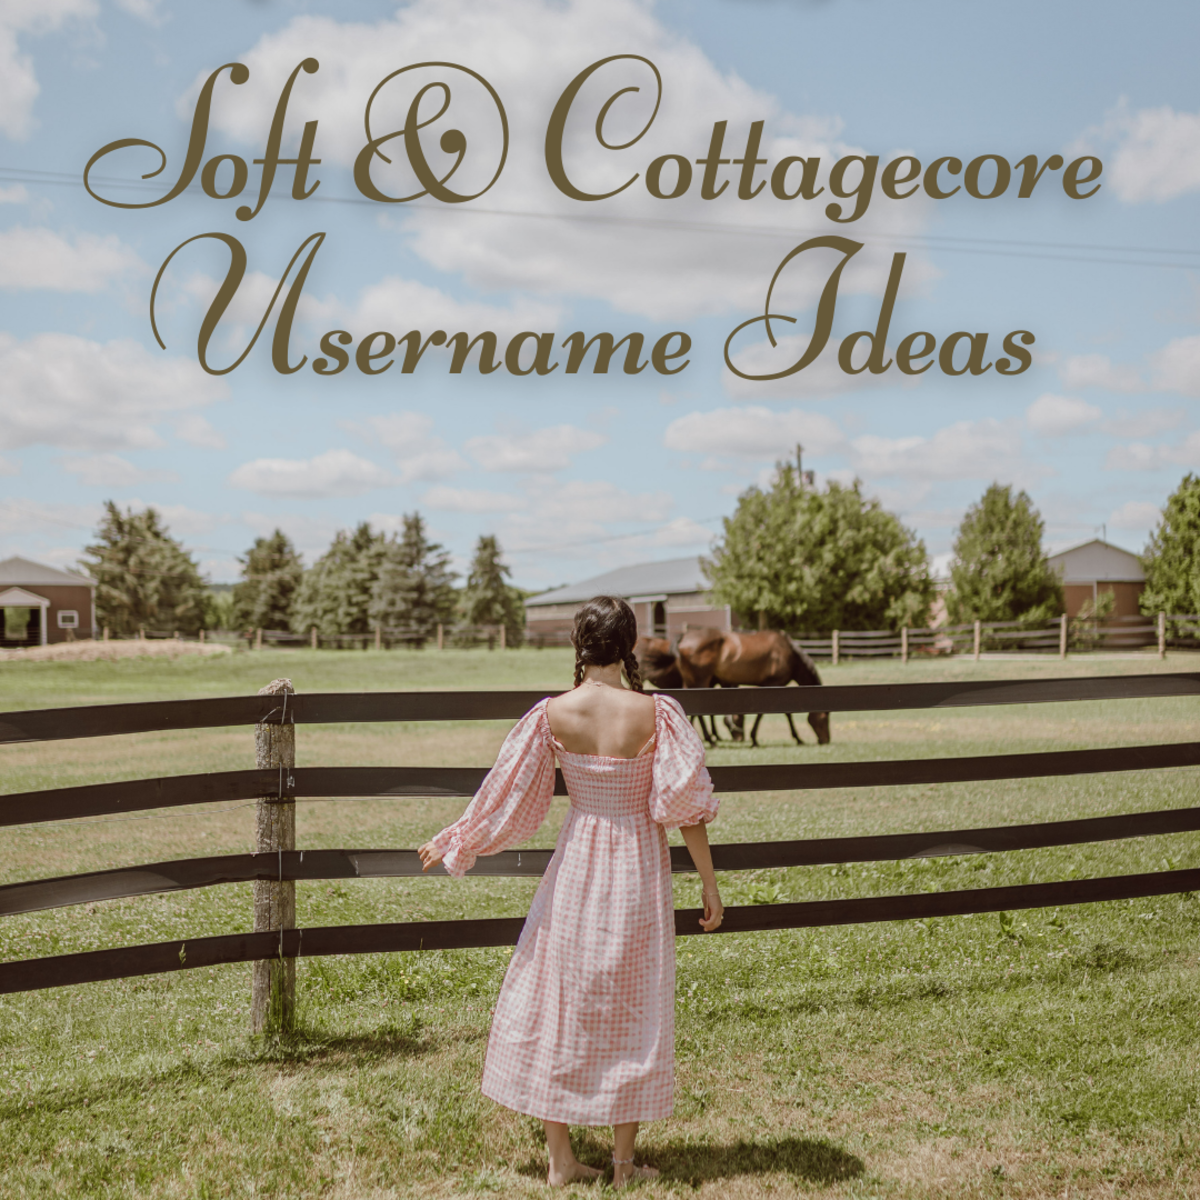 Interested in a cottagecore username? Here are some ideas for you!